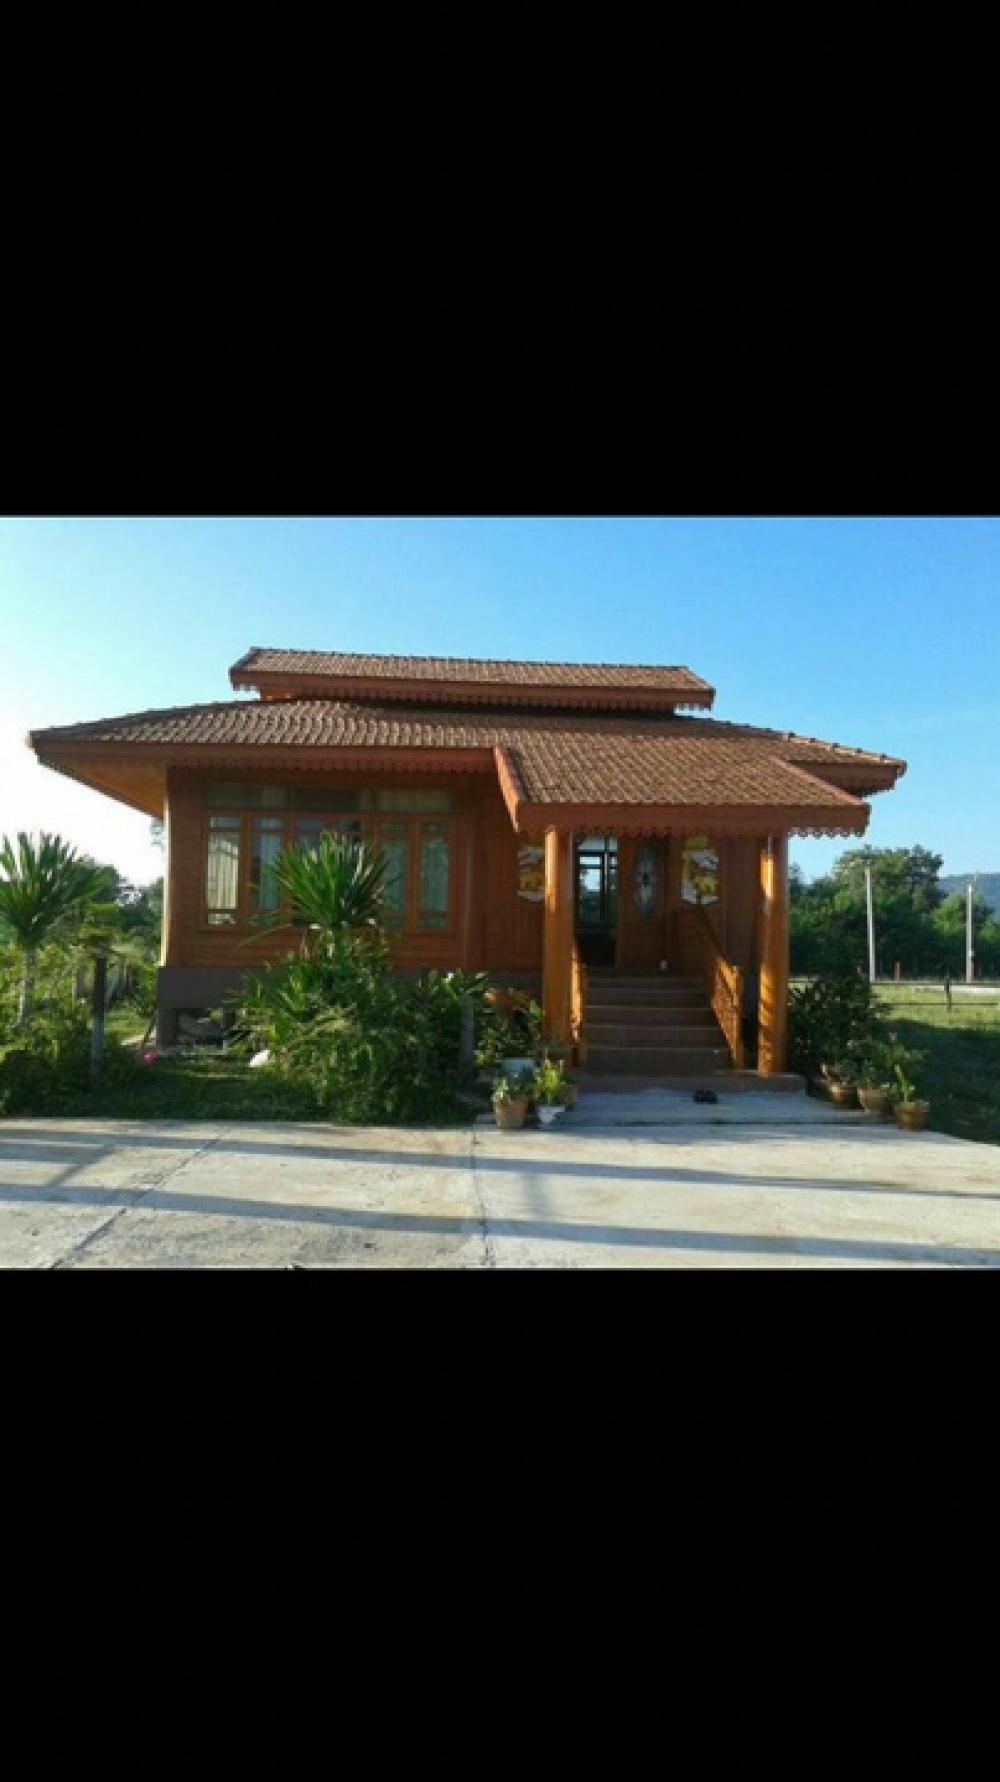 For SaleHouseKorat Nakhon Ratchasima : The owner is selling it himself. House with land in Nakhon Ratchasima Province.